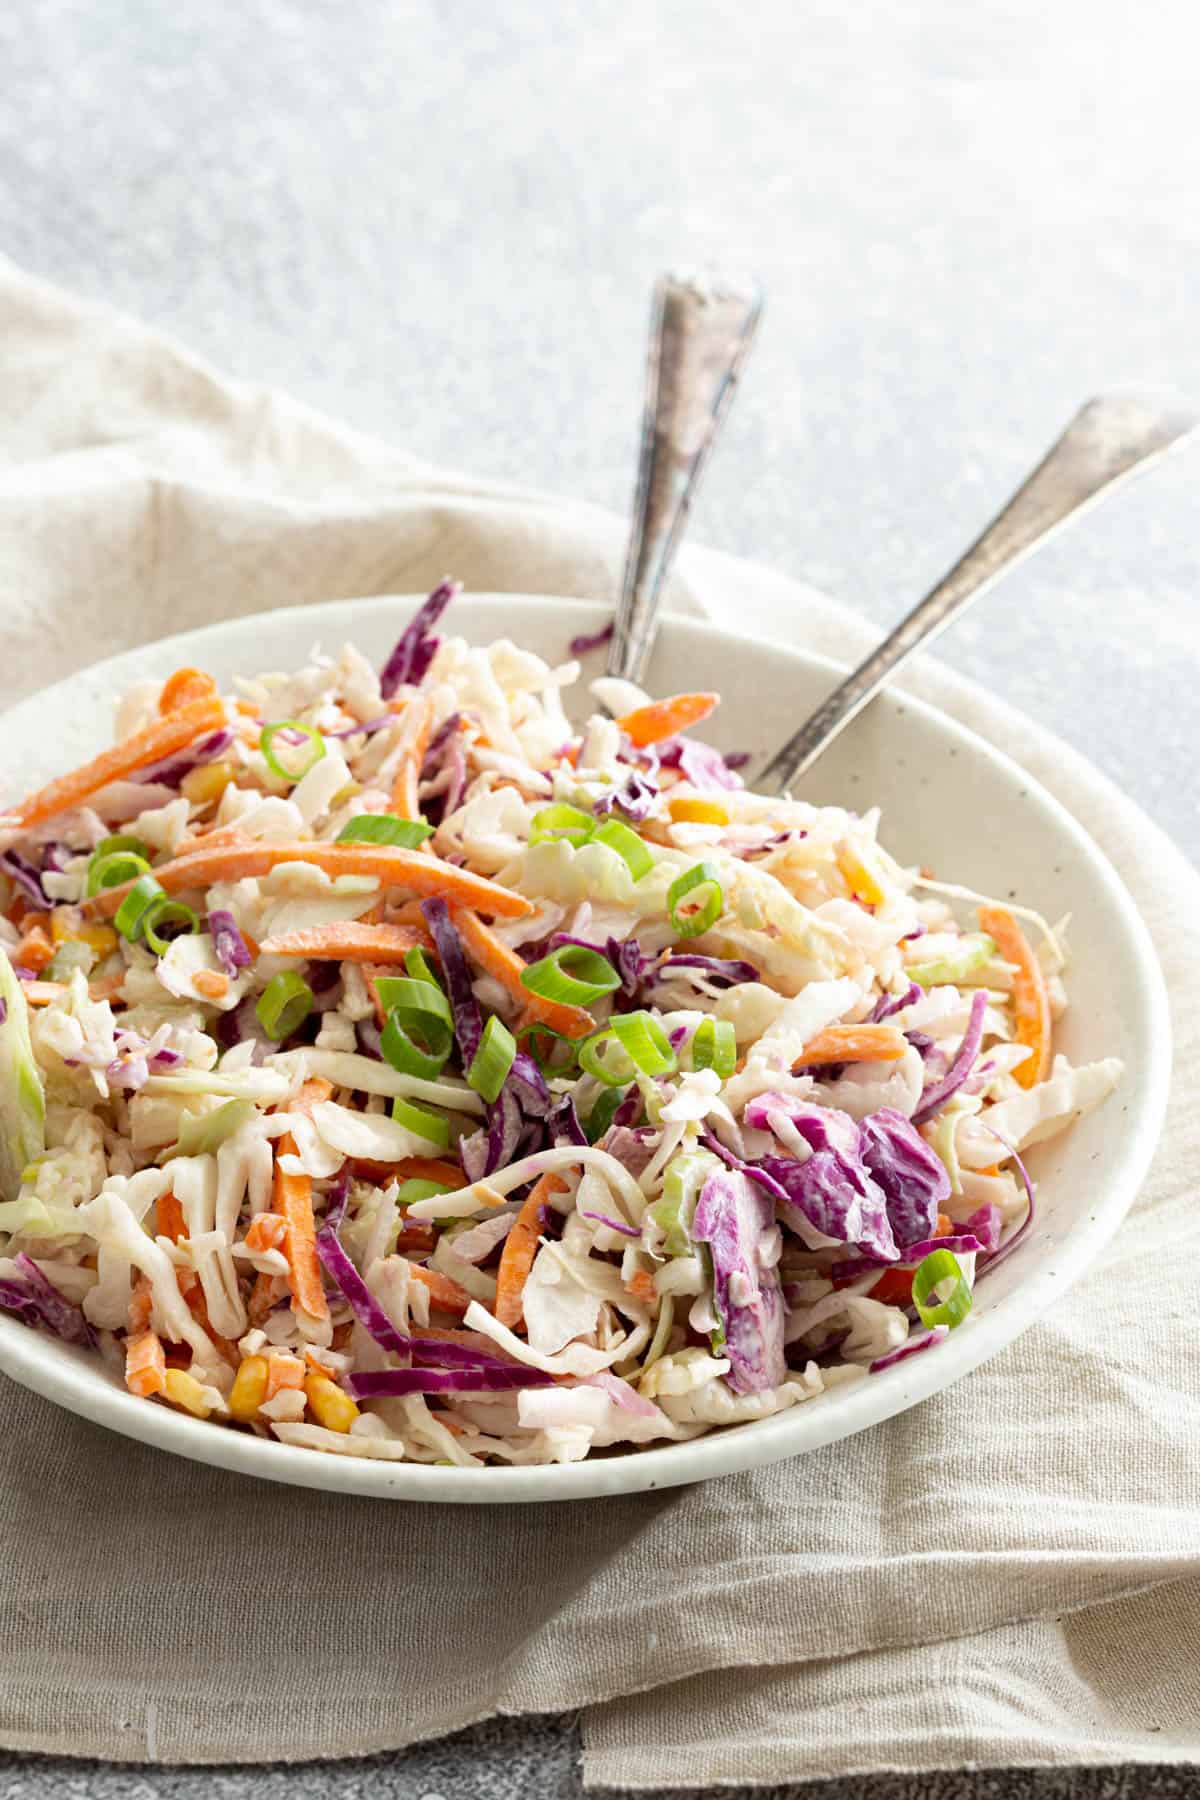 A white bowl filled with Japanese style coleslaw with silver salad servers.